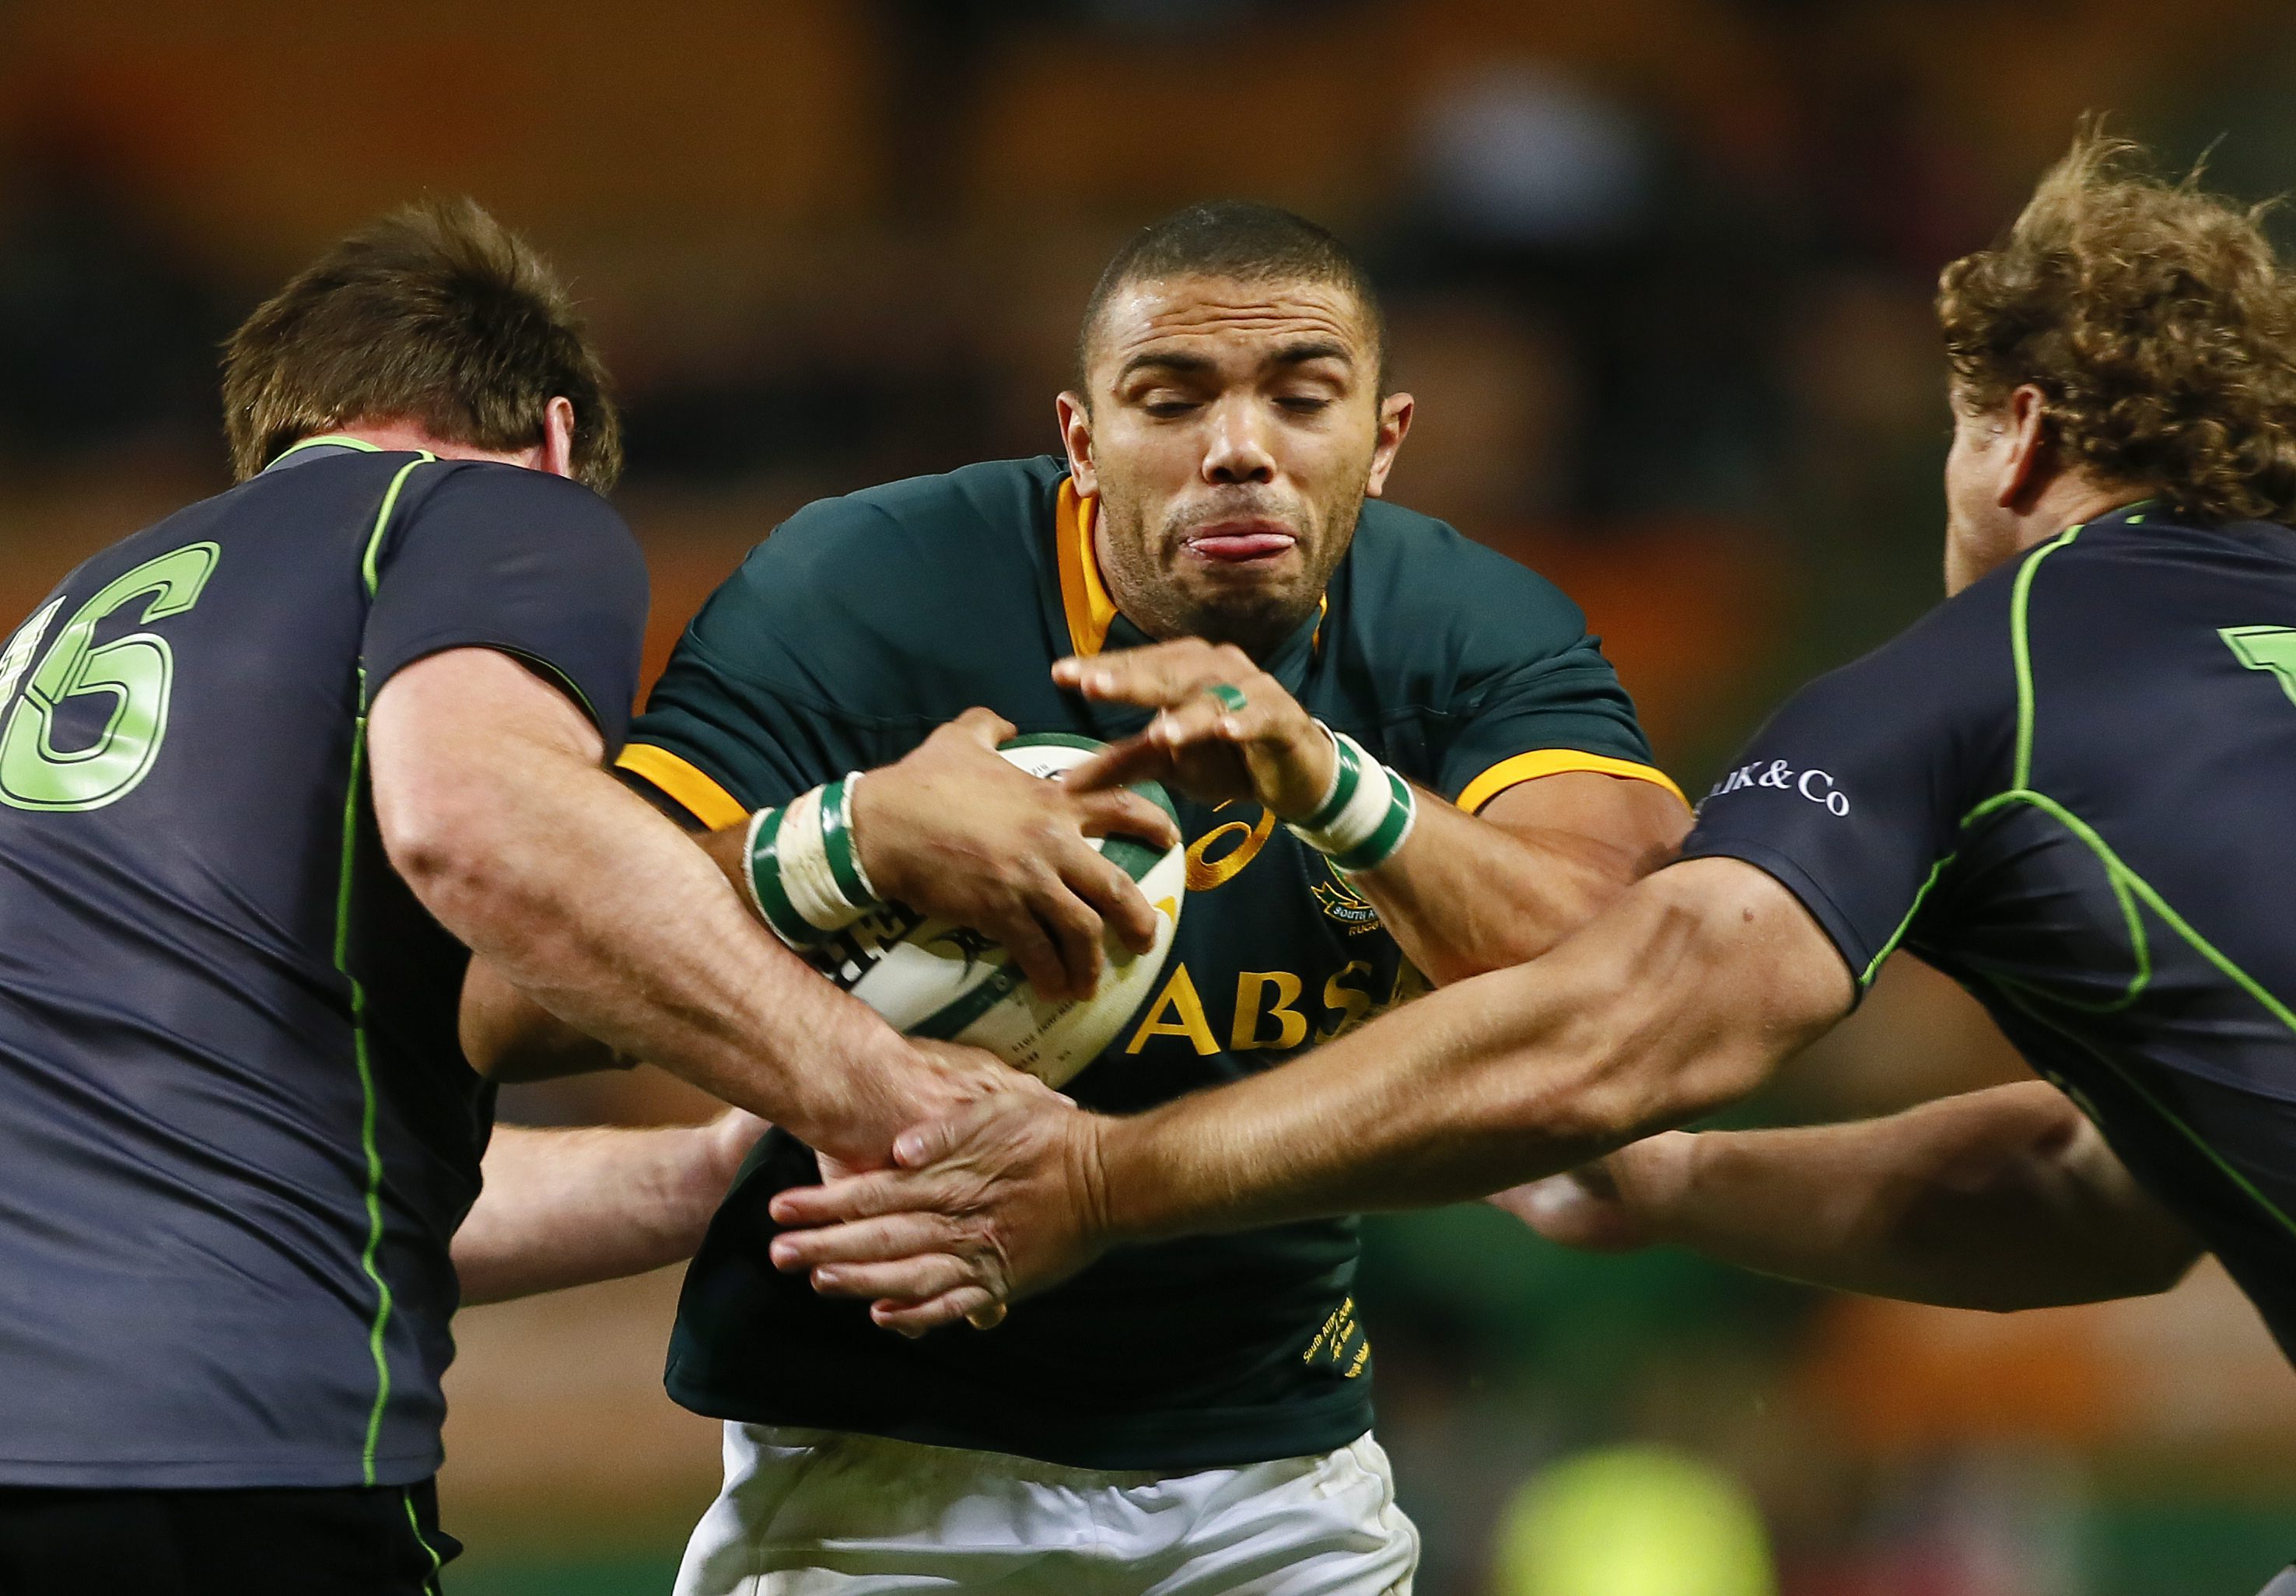 Bryan Habana is hoping for a happier encounter with the Wallabies than last time. Photo: EPA